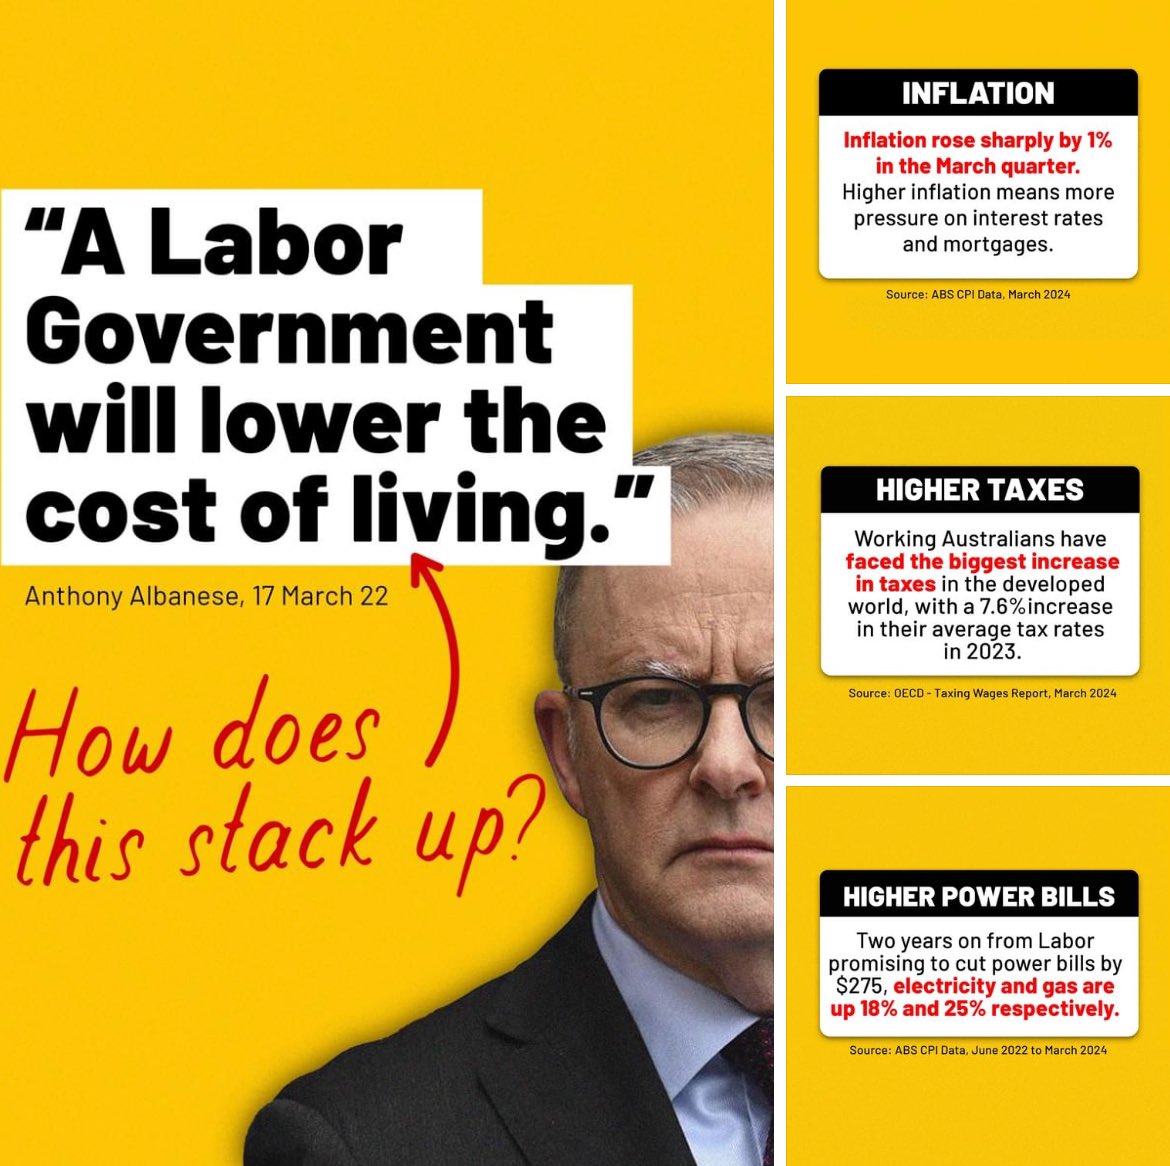 Anthony Albanese promised to lower the cost of living for Australians. Instead Australians are facing high inflation, higher taxes, and higher power prices.